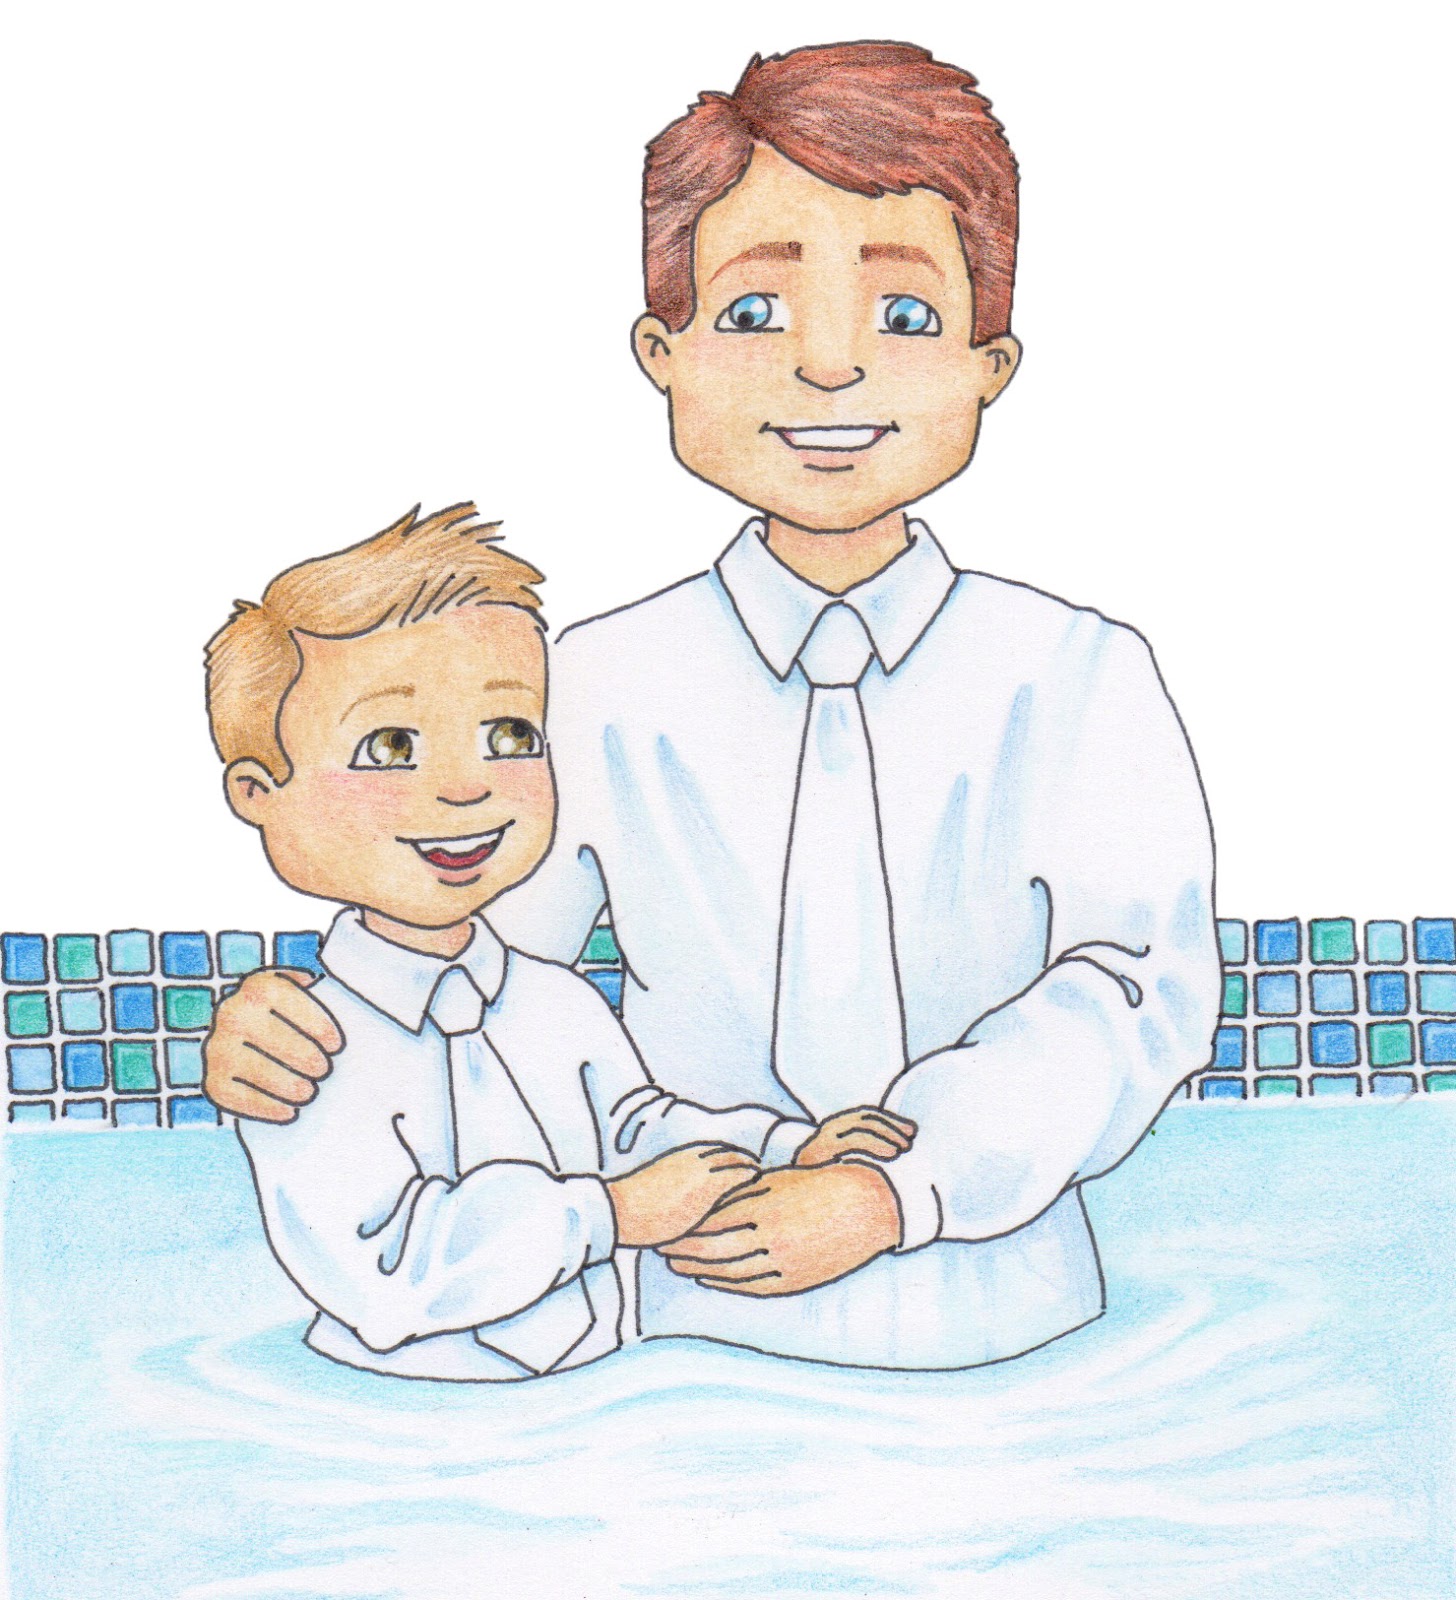 Baptisms, LDS and Clip art on